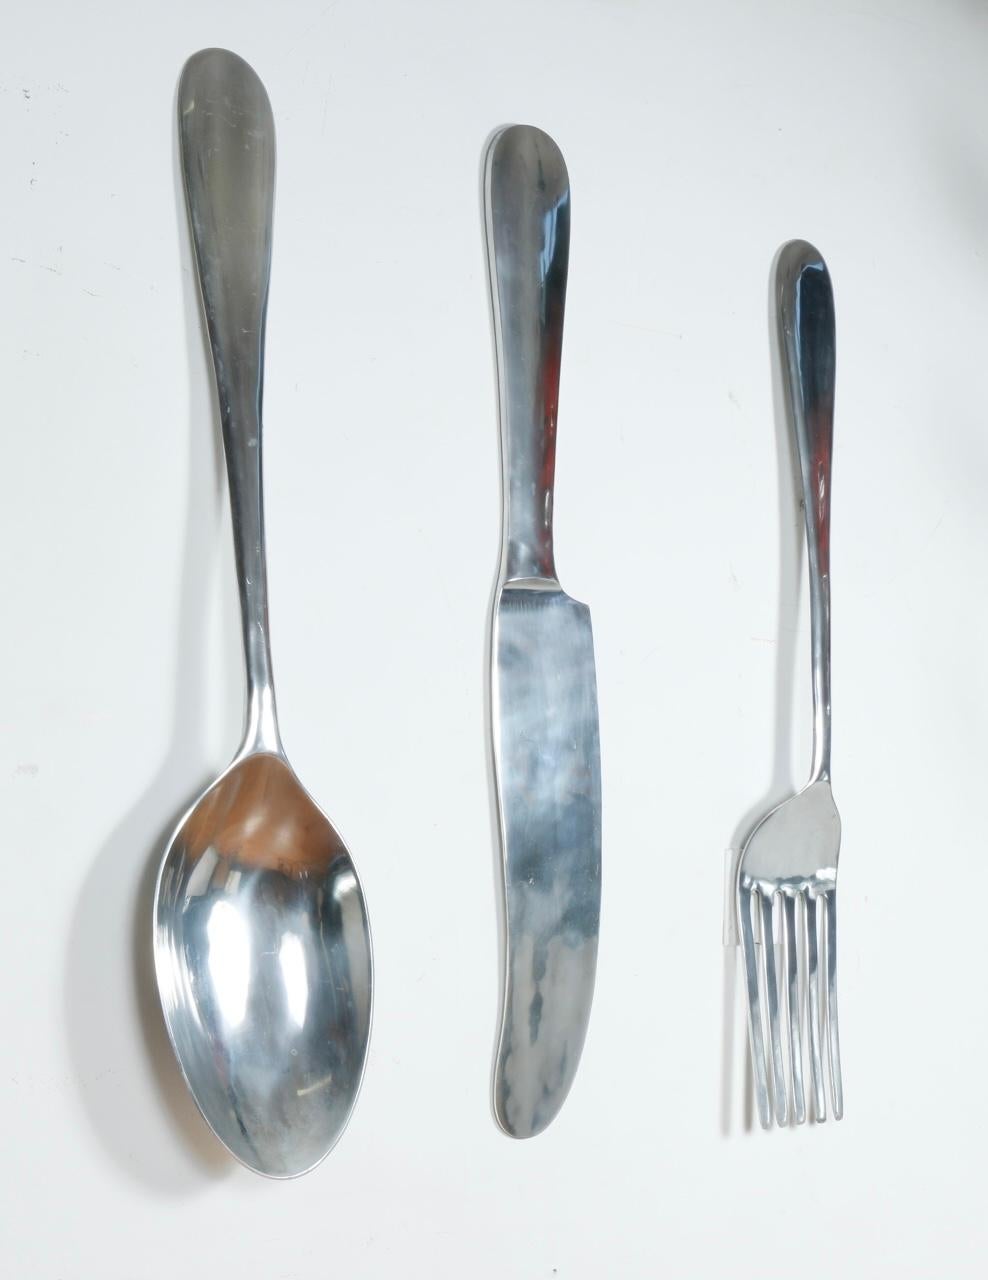 giant fork spoon and knife wall decor